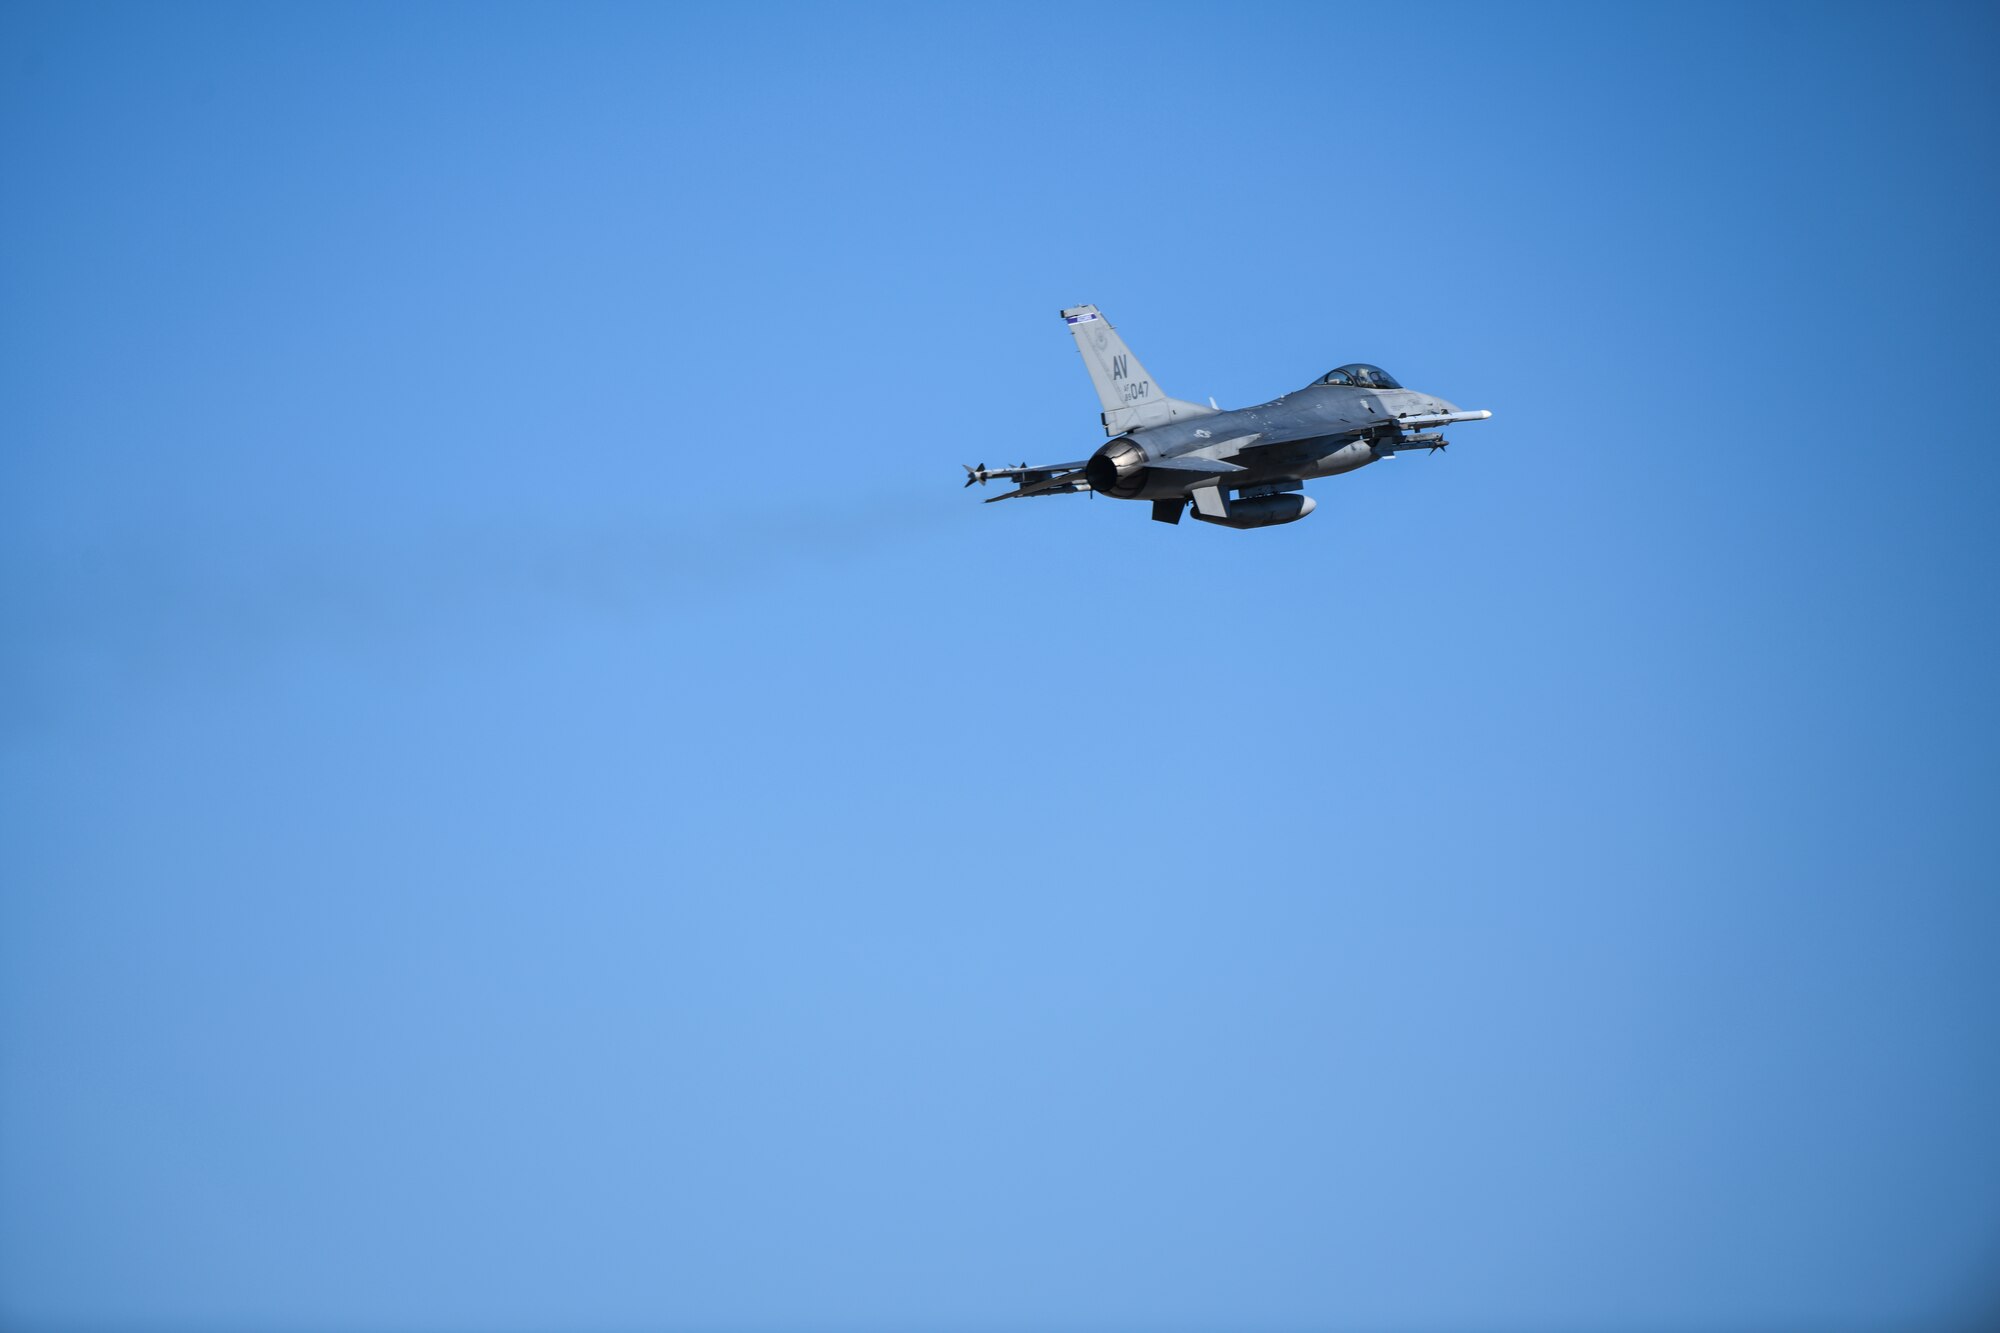 A U.S. Air Force F-16 Fighting Falcon from the 510th Fighter Squadron gains altitude at Aviano Air Base, Italy, March 16, 2020. The 510th FS was originally formed as the 625th Bombardment Squadron (Dive), 405th Bombardment Group, at Drew Field, Florida, in 1943, flying the Douglas A-24 Banshee. (U.S. Air Force photo by Airman 1st Class Ericka A. Woolever)